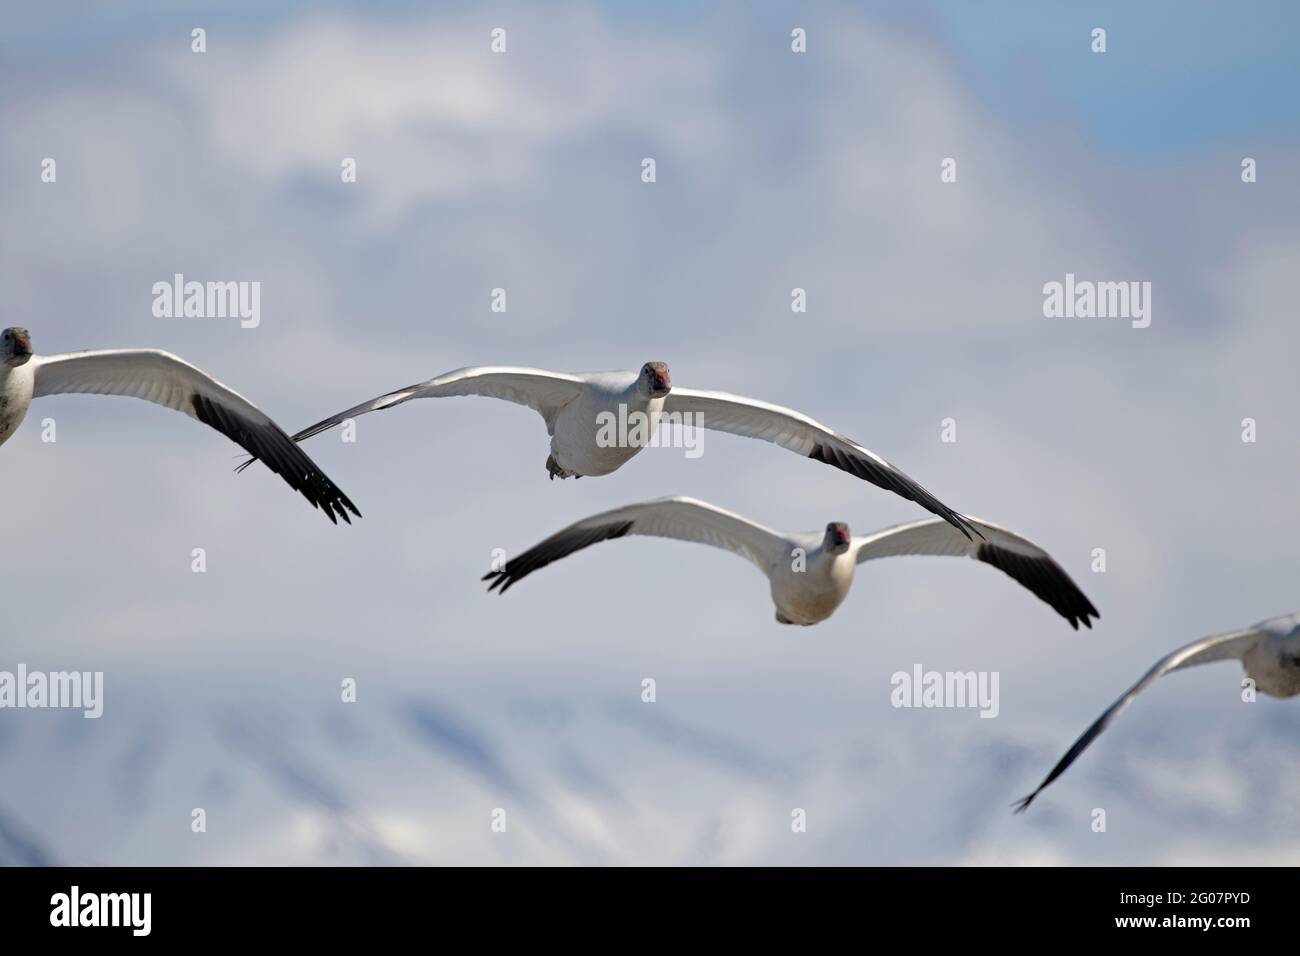 Northbound snow geese arriving in Southcentral Alaska in late April are captured in flight with the snow-covered Chugach Mountains in the background. Stock Photo